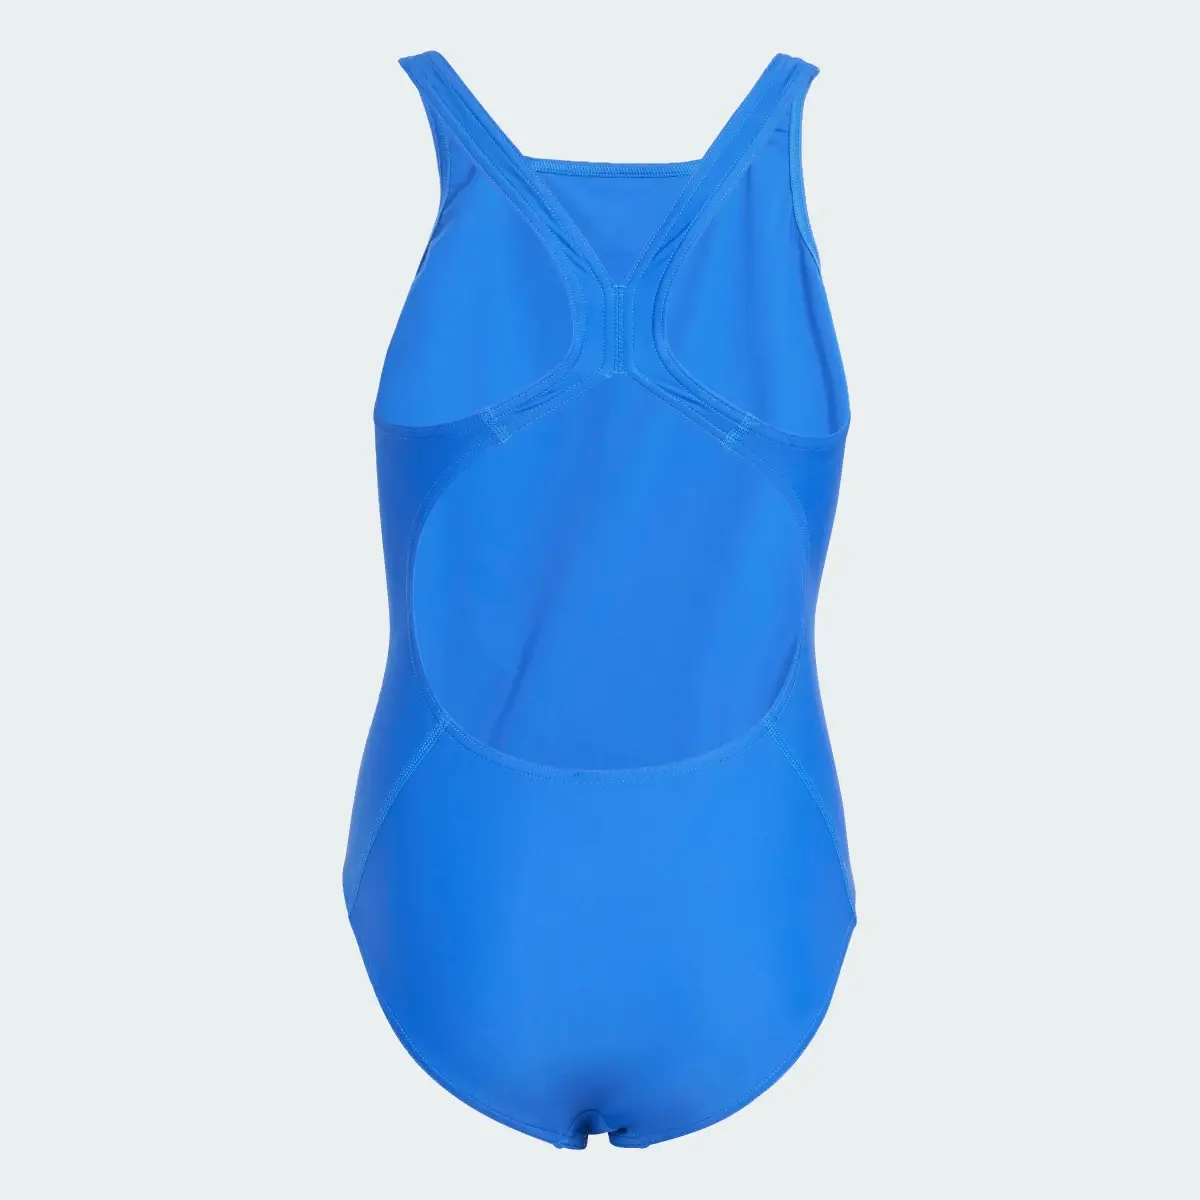 Adidas Solid Small Logo Swimsuit. 2